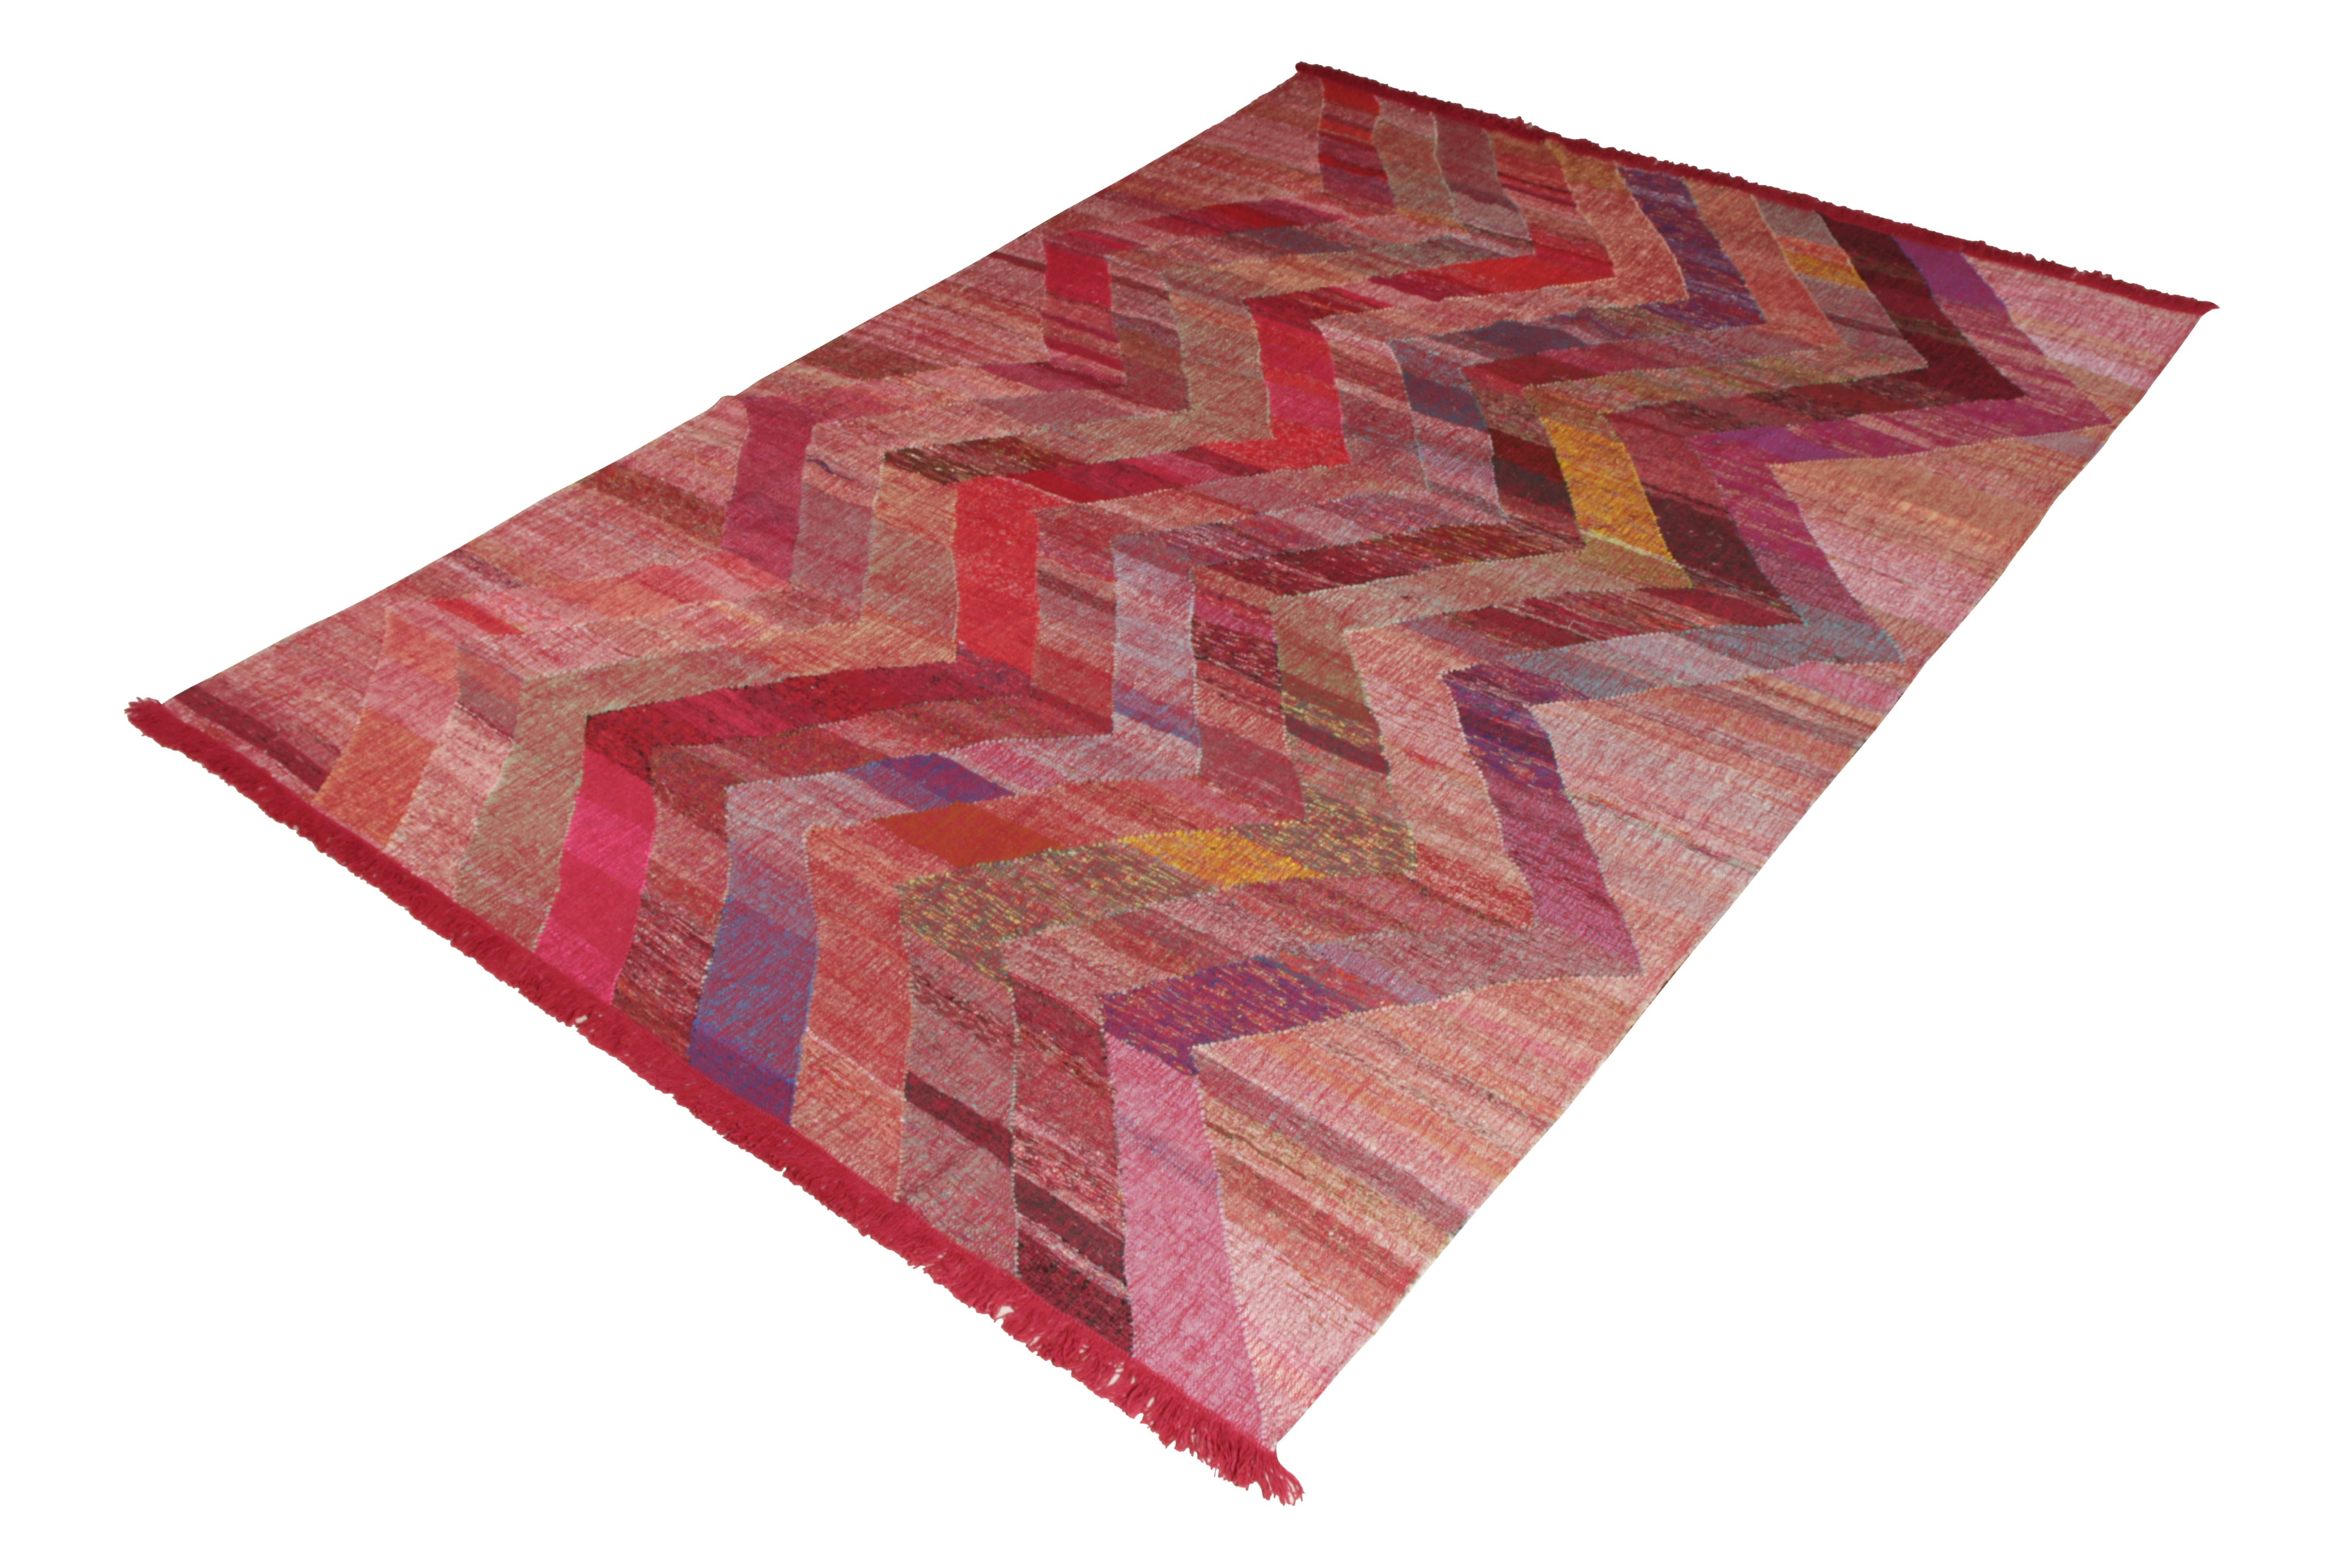 This modern Kilim represents a selection of distinct new patterns joining Rug & Kilim’s titular Kilim & flat-weave collection, with this piece representing a sub collection uniquely handwoven from the yarns of Classic textiles and Kilims to create